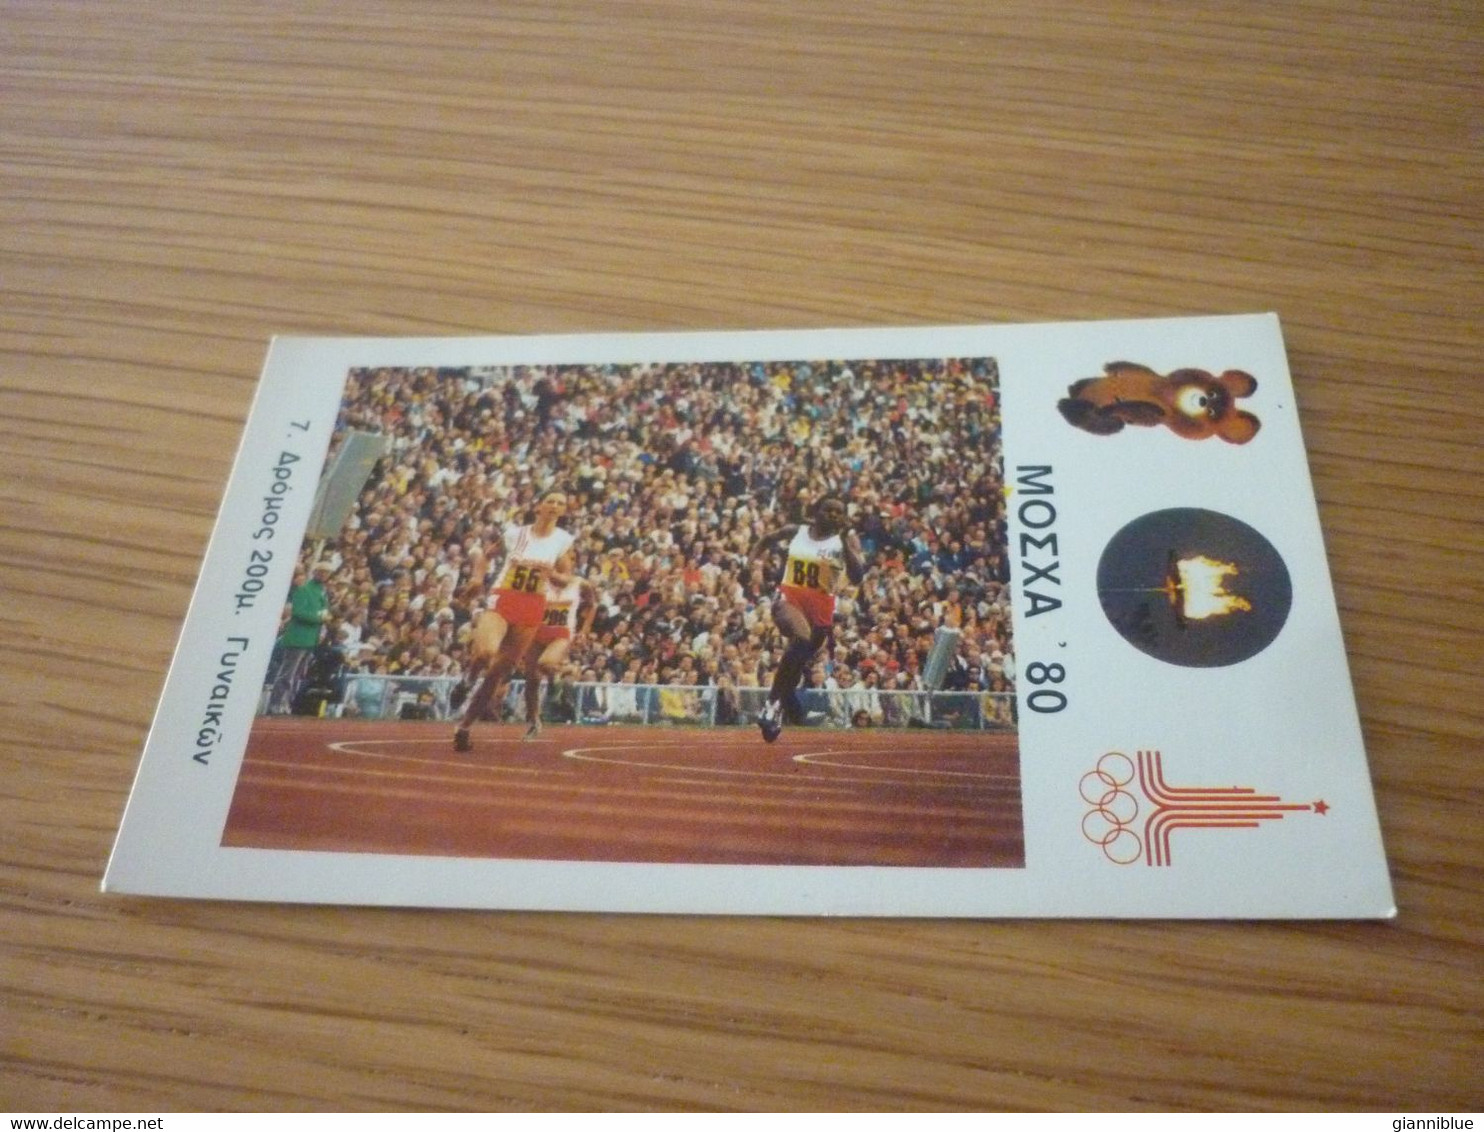 Women's 200 Metres Meters Run Moscow 1980 Olympic Games Old Greek Trading Card - Trading Cards